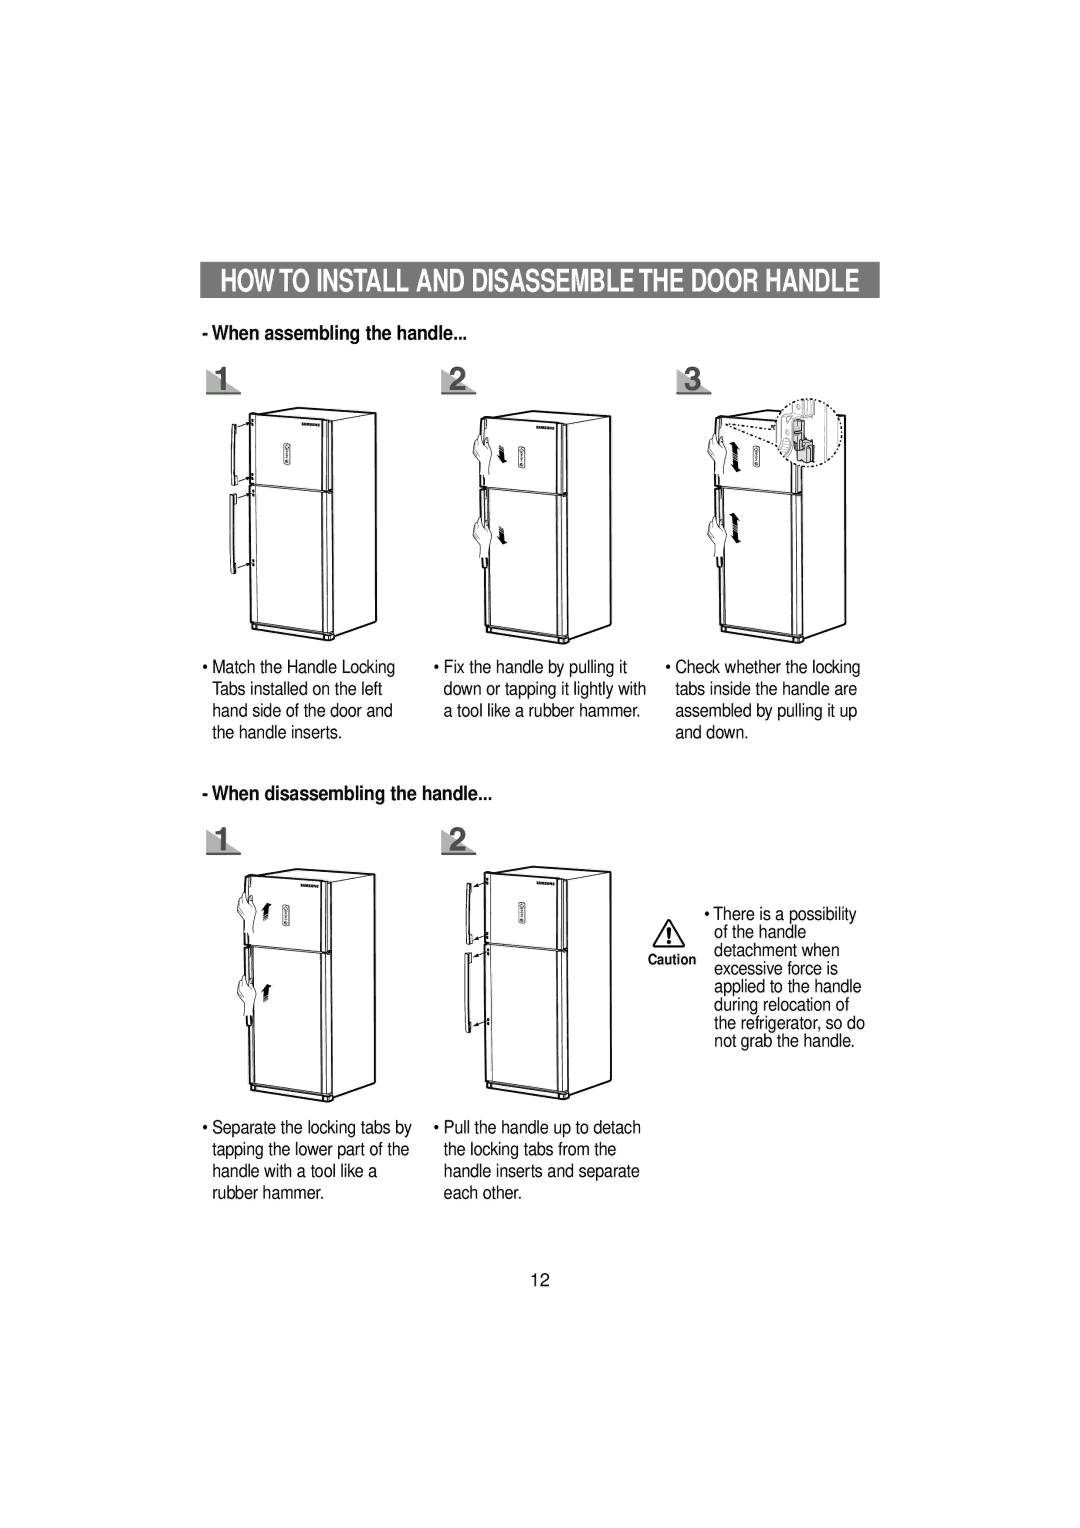 Samsung RT53EANB1/XET, RT53EATG1/XET, RT53ECMT1/XET, RT53ECSM1/XET manual HOW to Install and Disassemble the Door Handle 